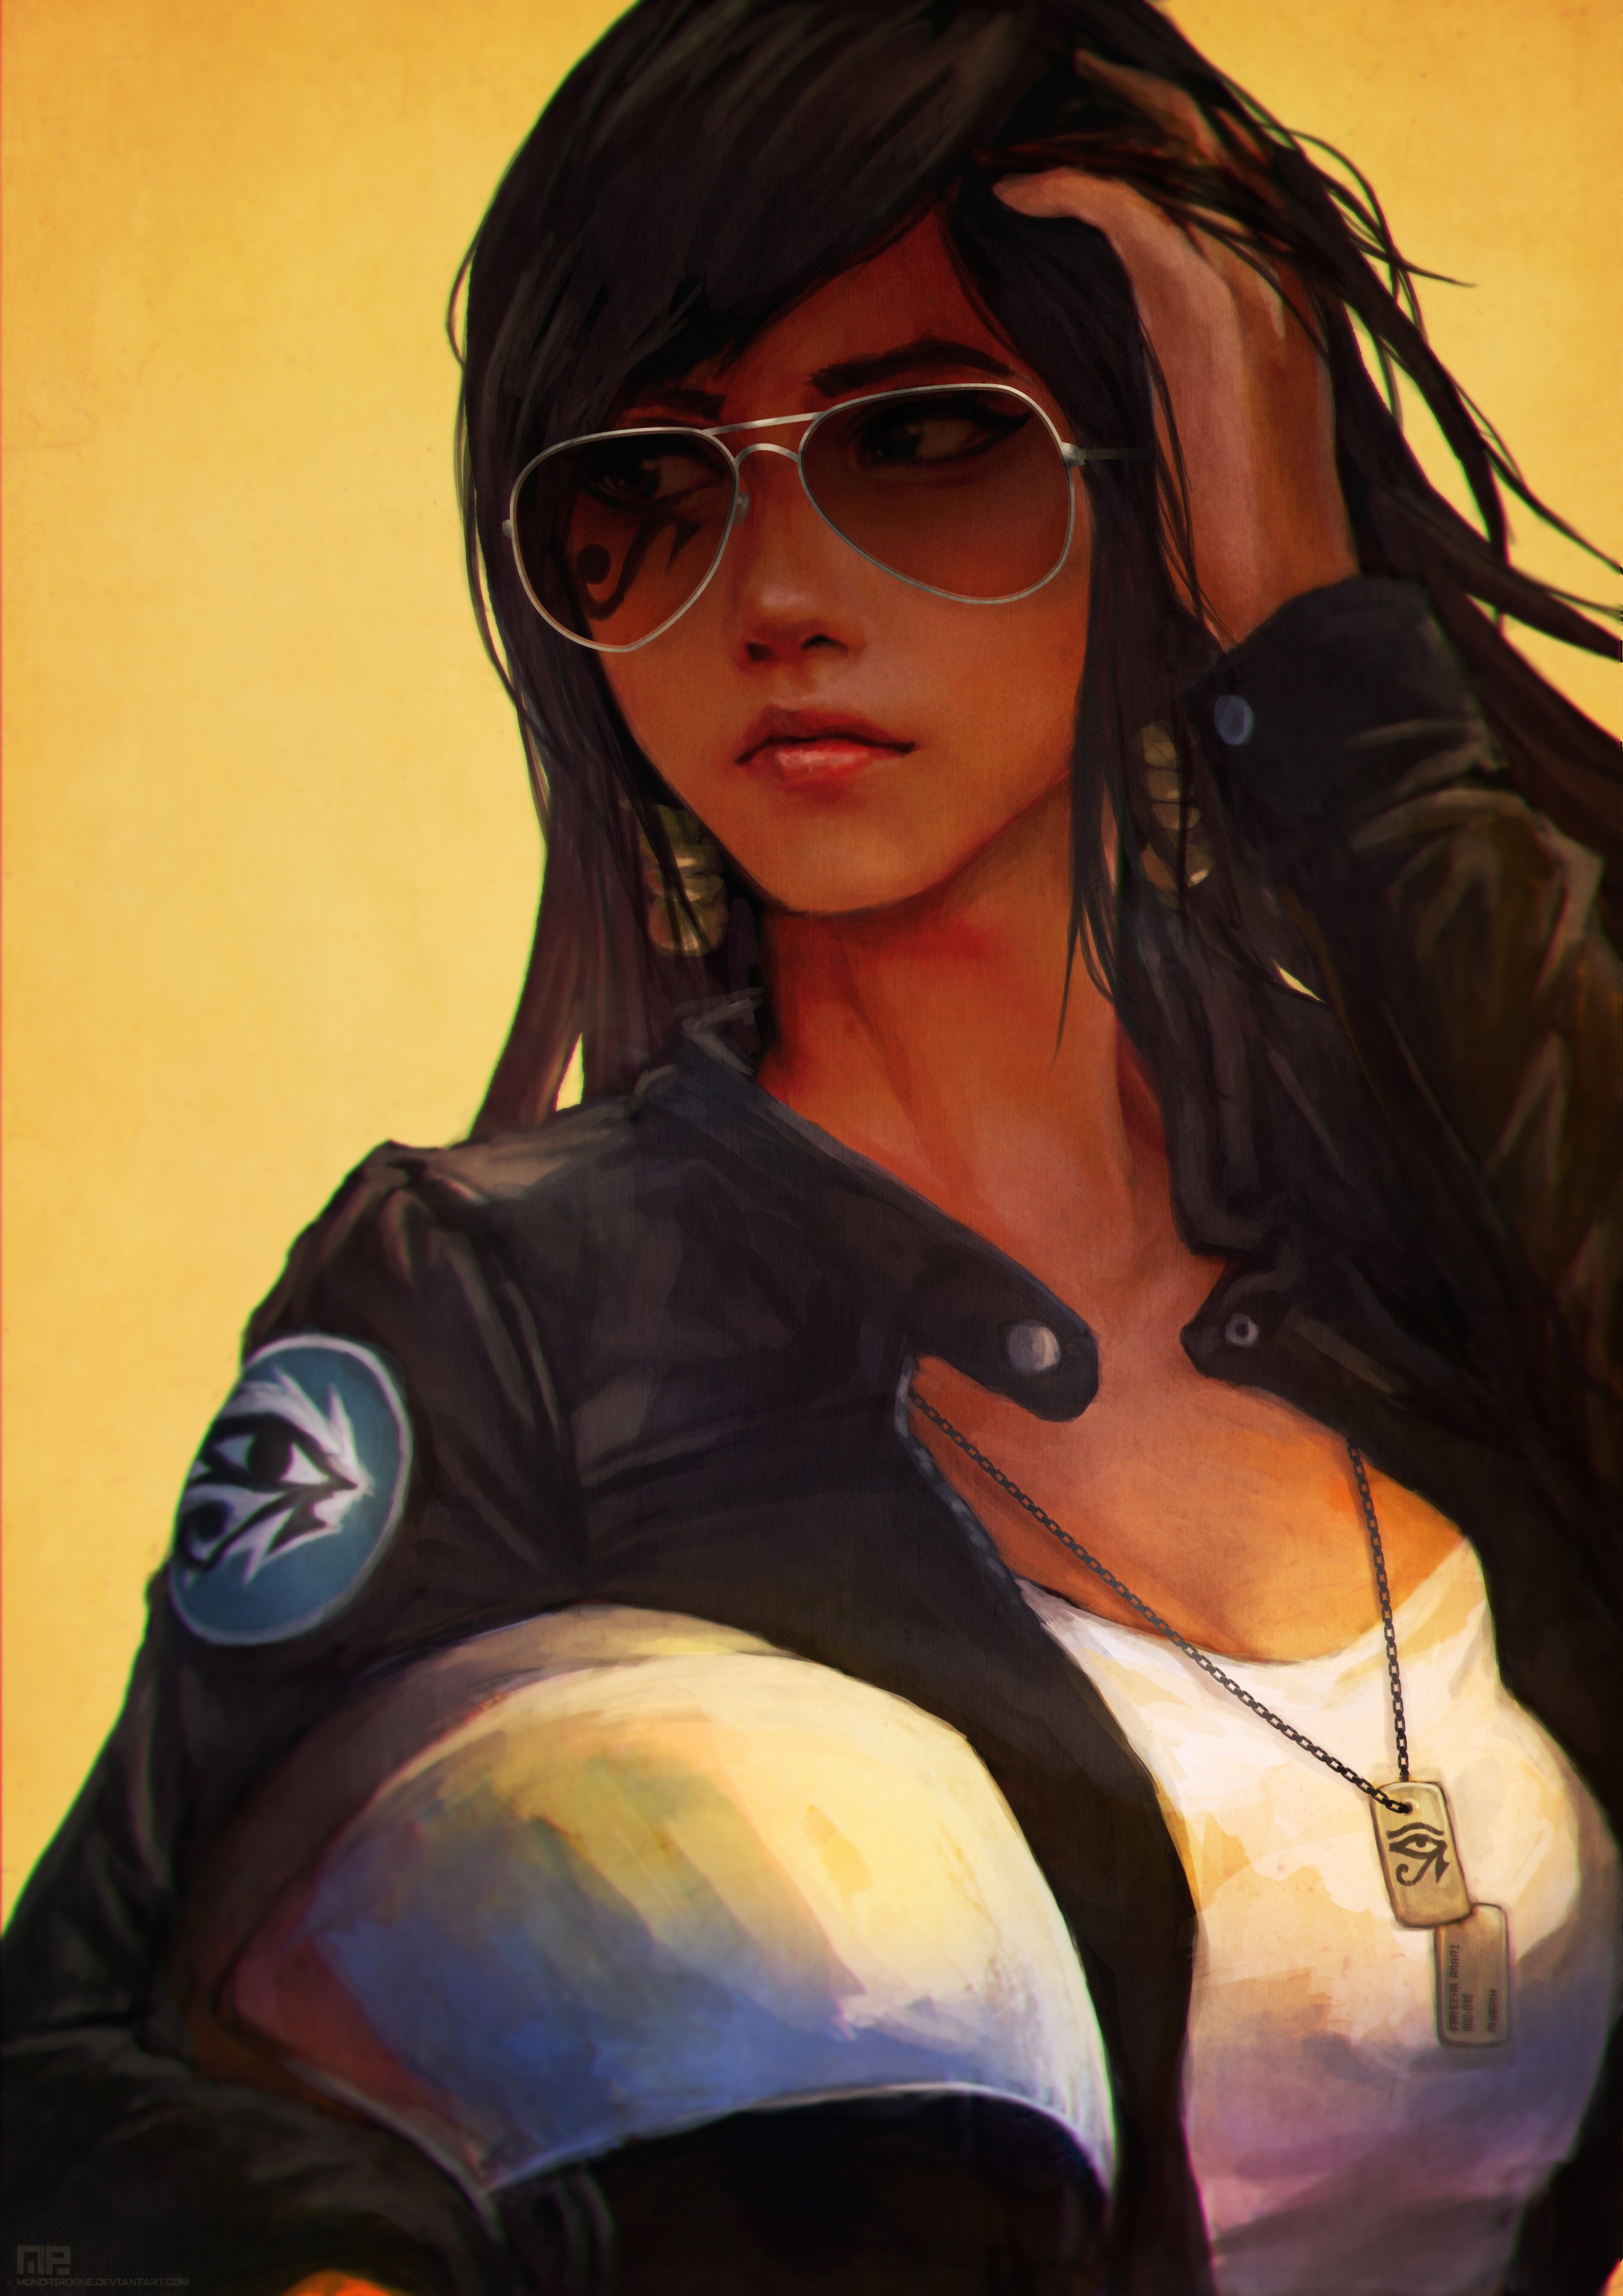 General 2480x3508 digital art glasses Overwatch fan art Pharah (Overwatch) women with shades yellow background looking away women PC gaming video game girls video game characters